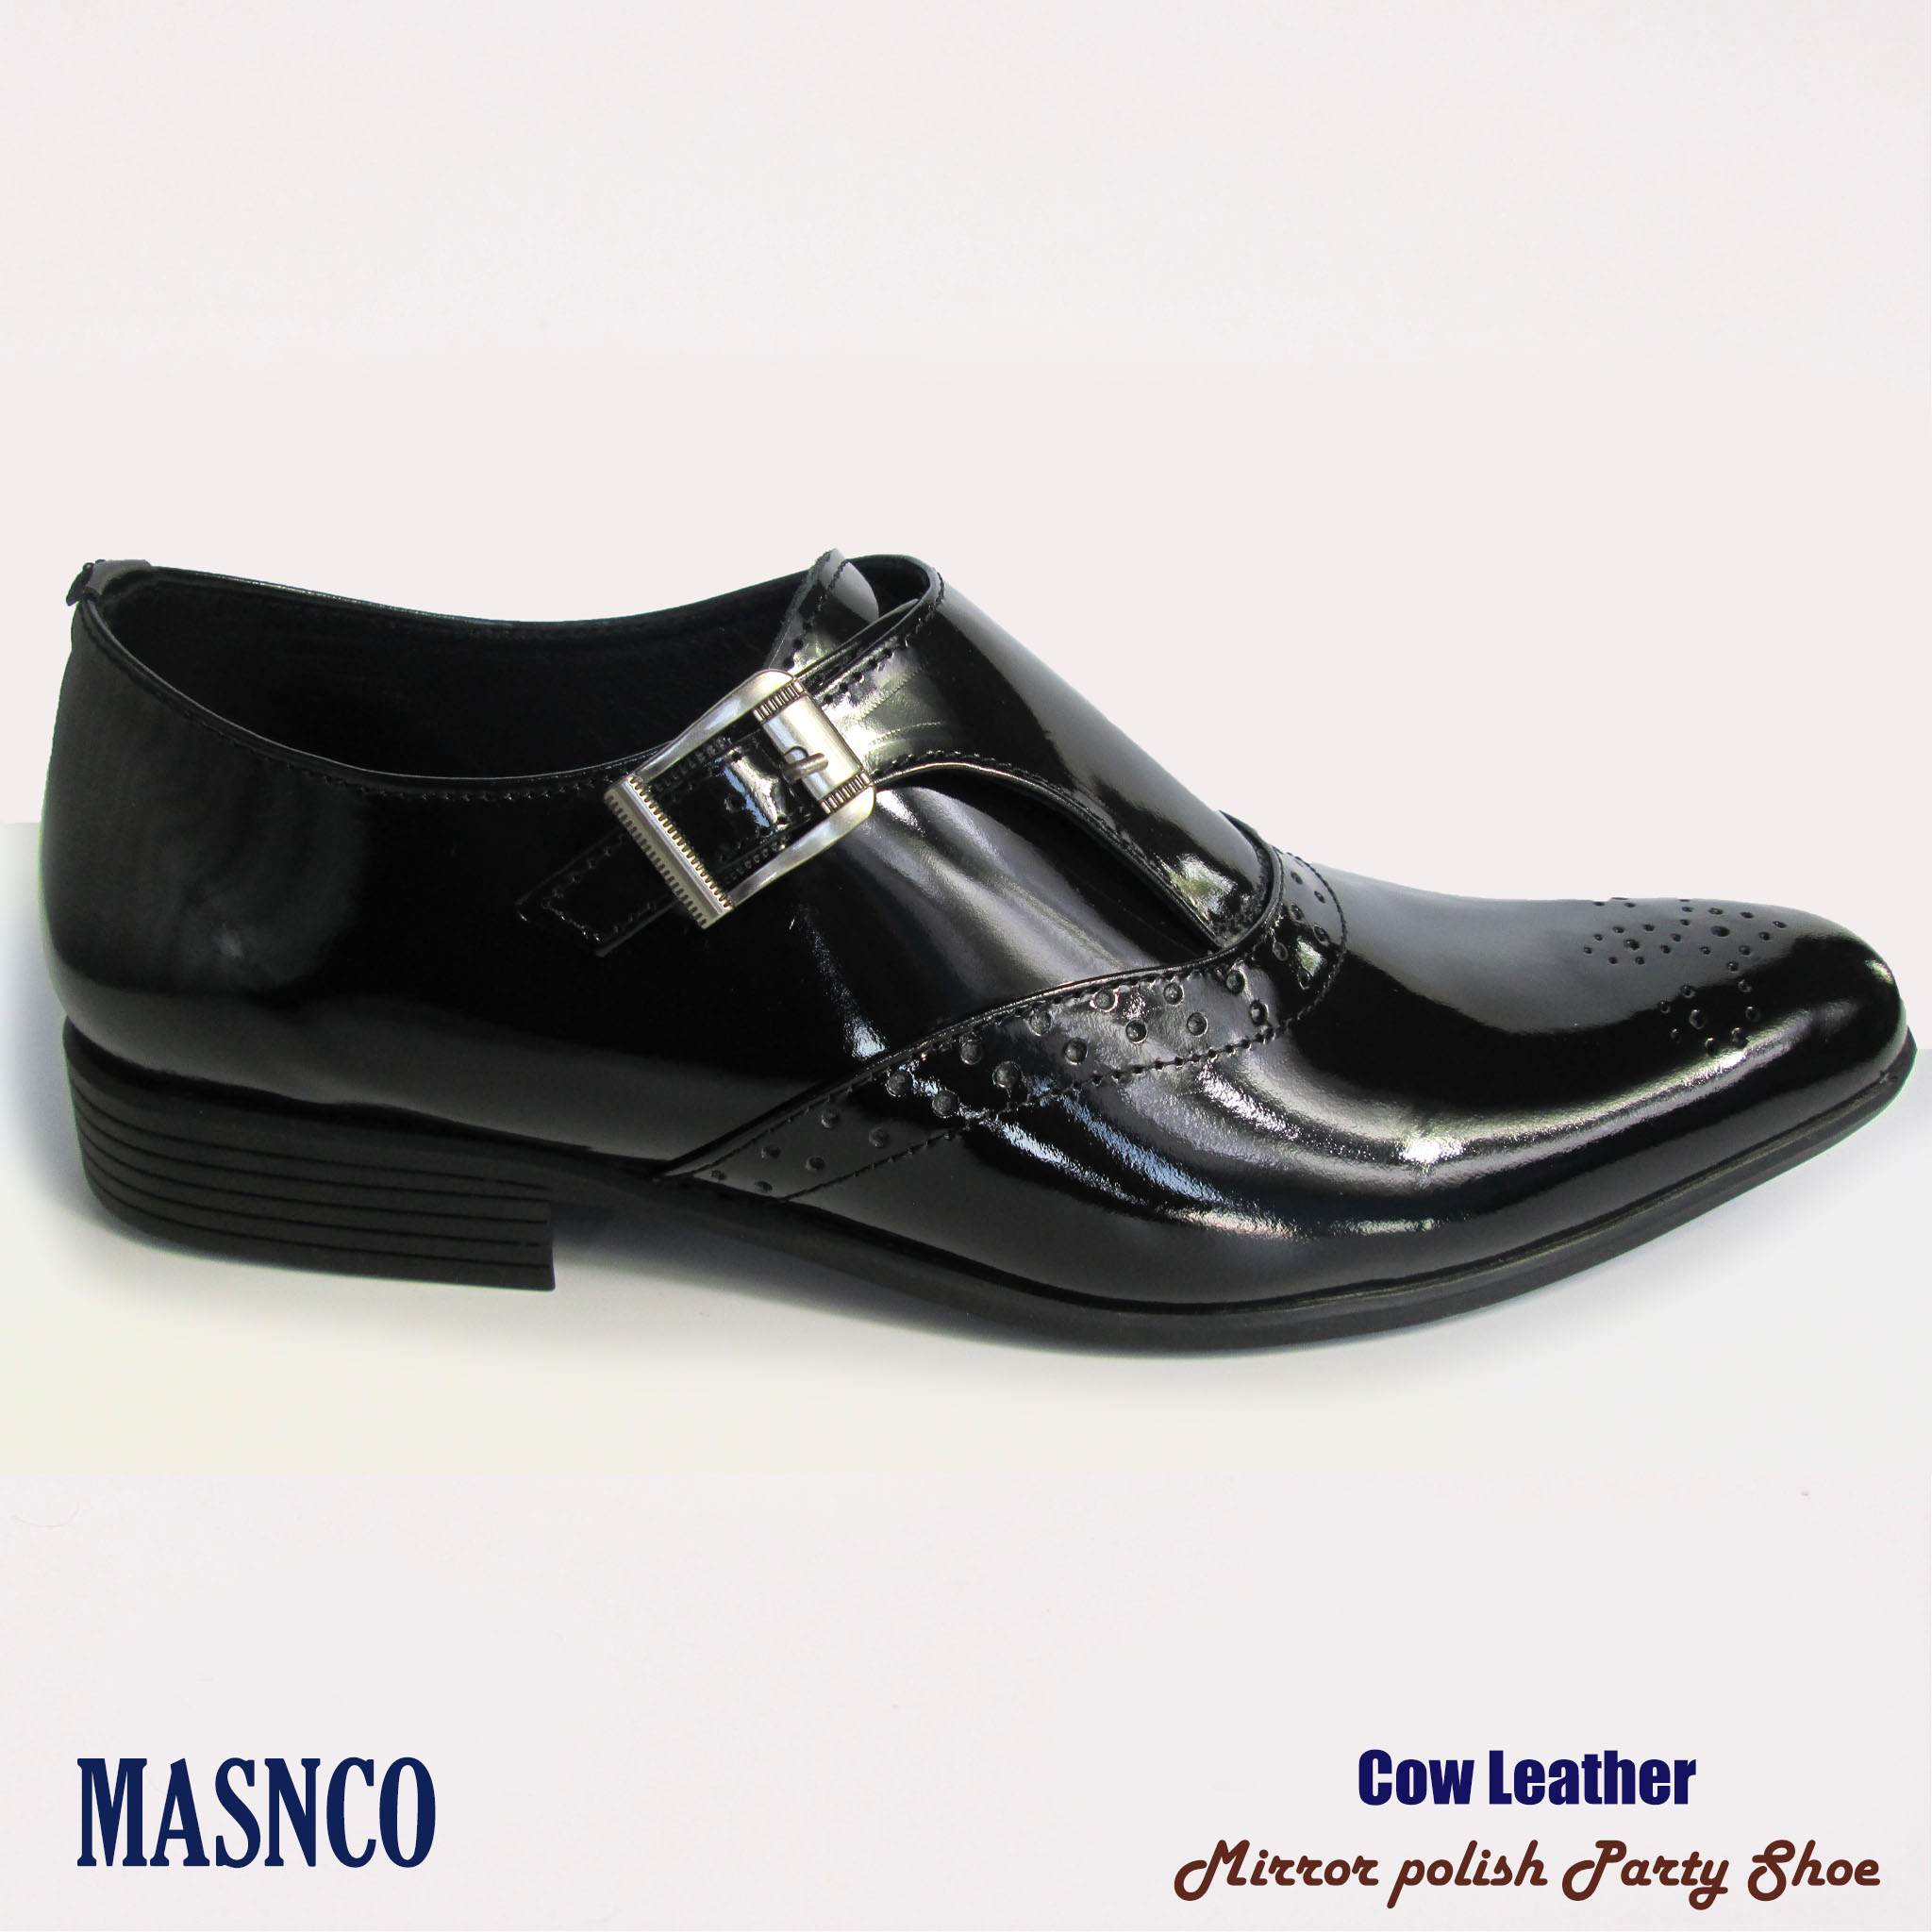 Glossy Black Cowhide Leather Monk Strap Shoe.